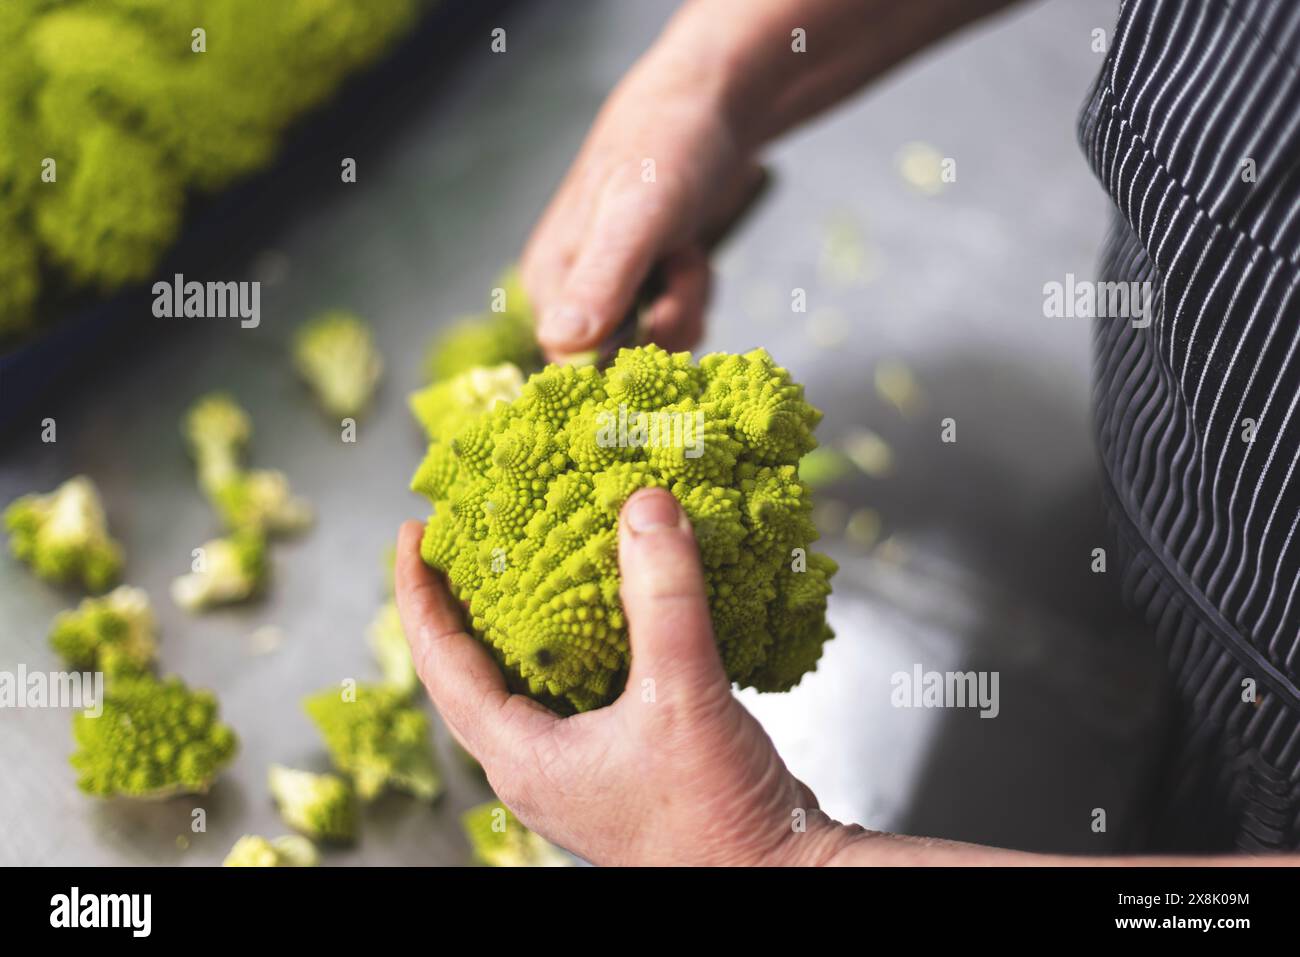 Close-up of hands holding a fresh romanesco broccoli, with vibrant green patterns Stock Photo